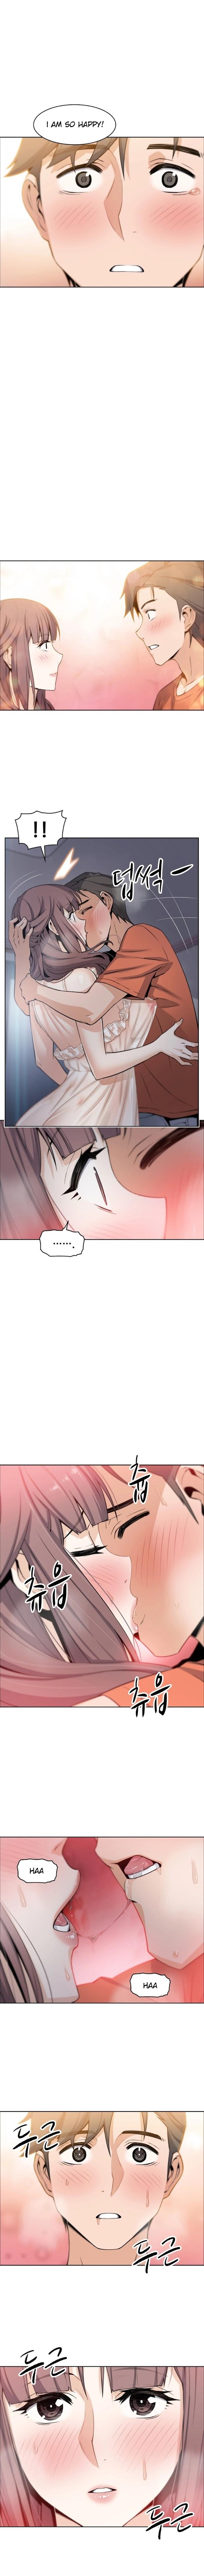 Housekeeper [Neck Pillow, Paper] Ch.49/49 [English] [Manhwa PDF] Completed 120